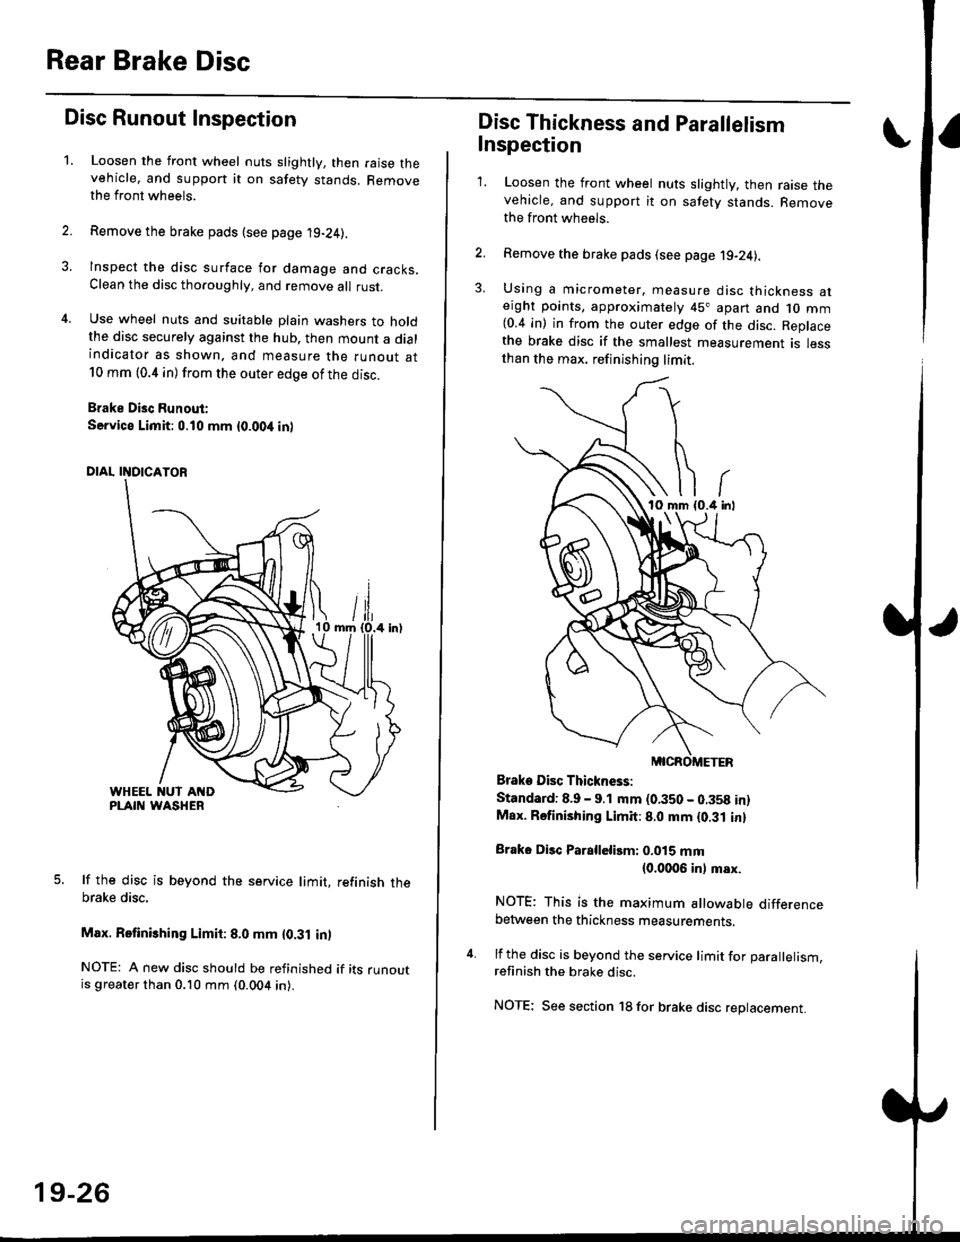 HONDA CIVIC 1997 6.G User Guide Rear Brake Disc
Disc Runout Inspection
1.Loosen the front wheel nuts slightly, then raise thevehicle, and suppon it on safety stands. Removethe front wheels.
Remove the brake pads (see page 19-24).
In